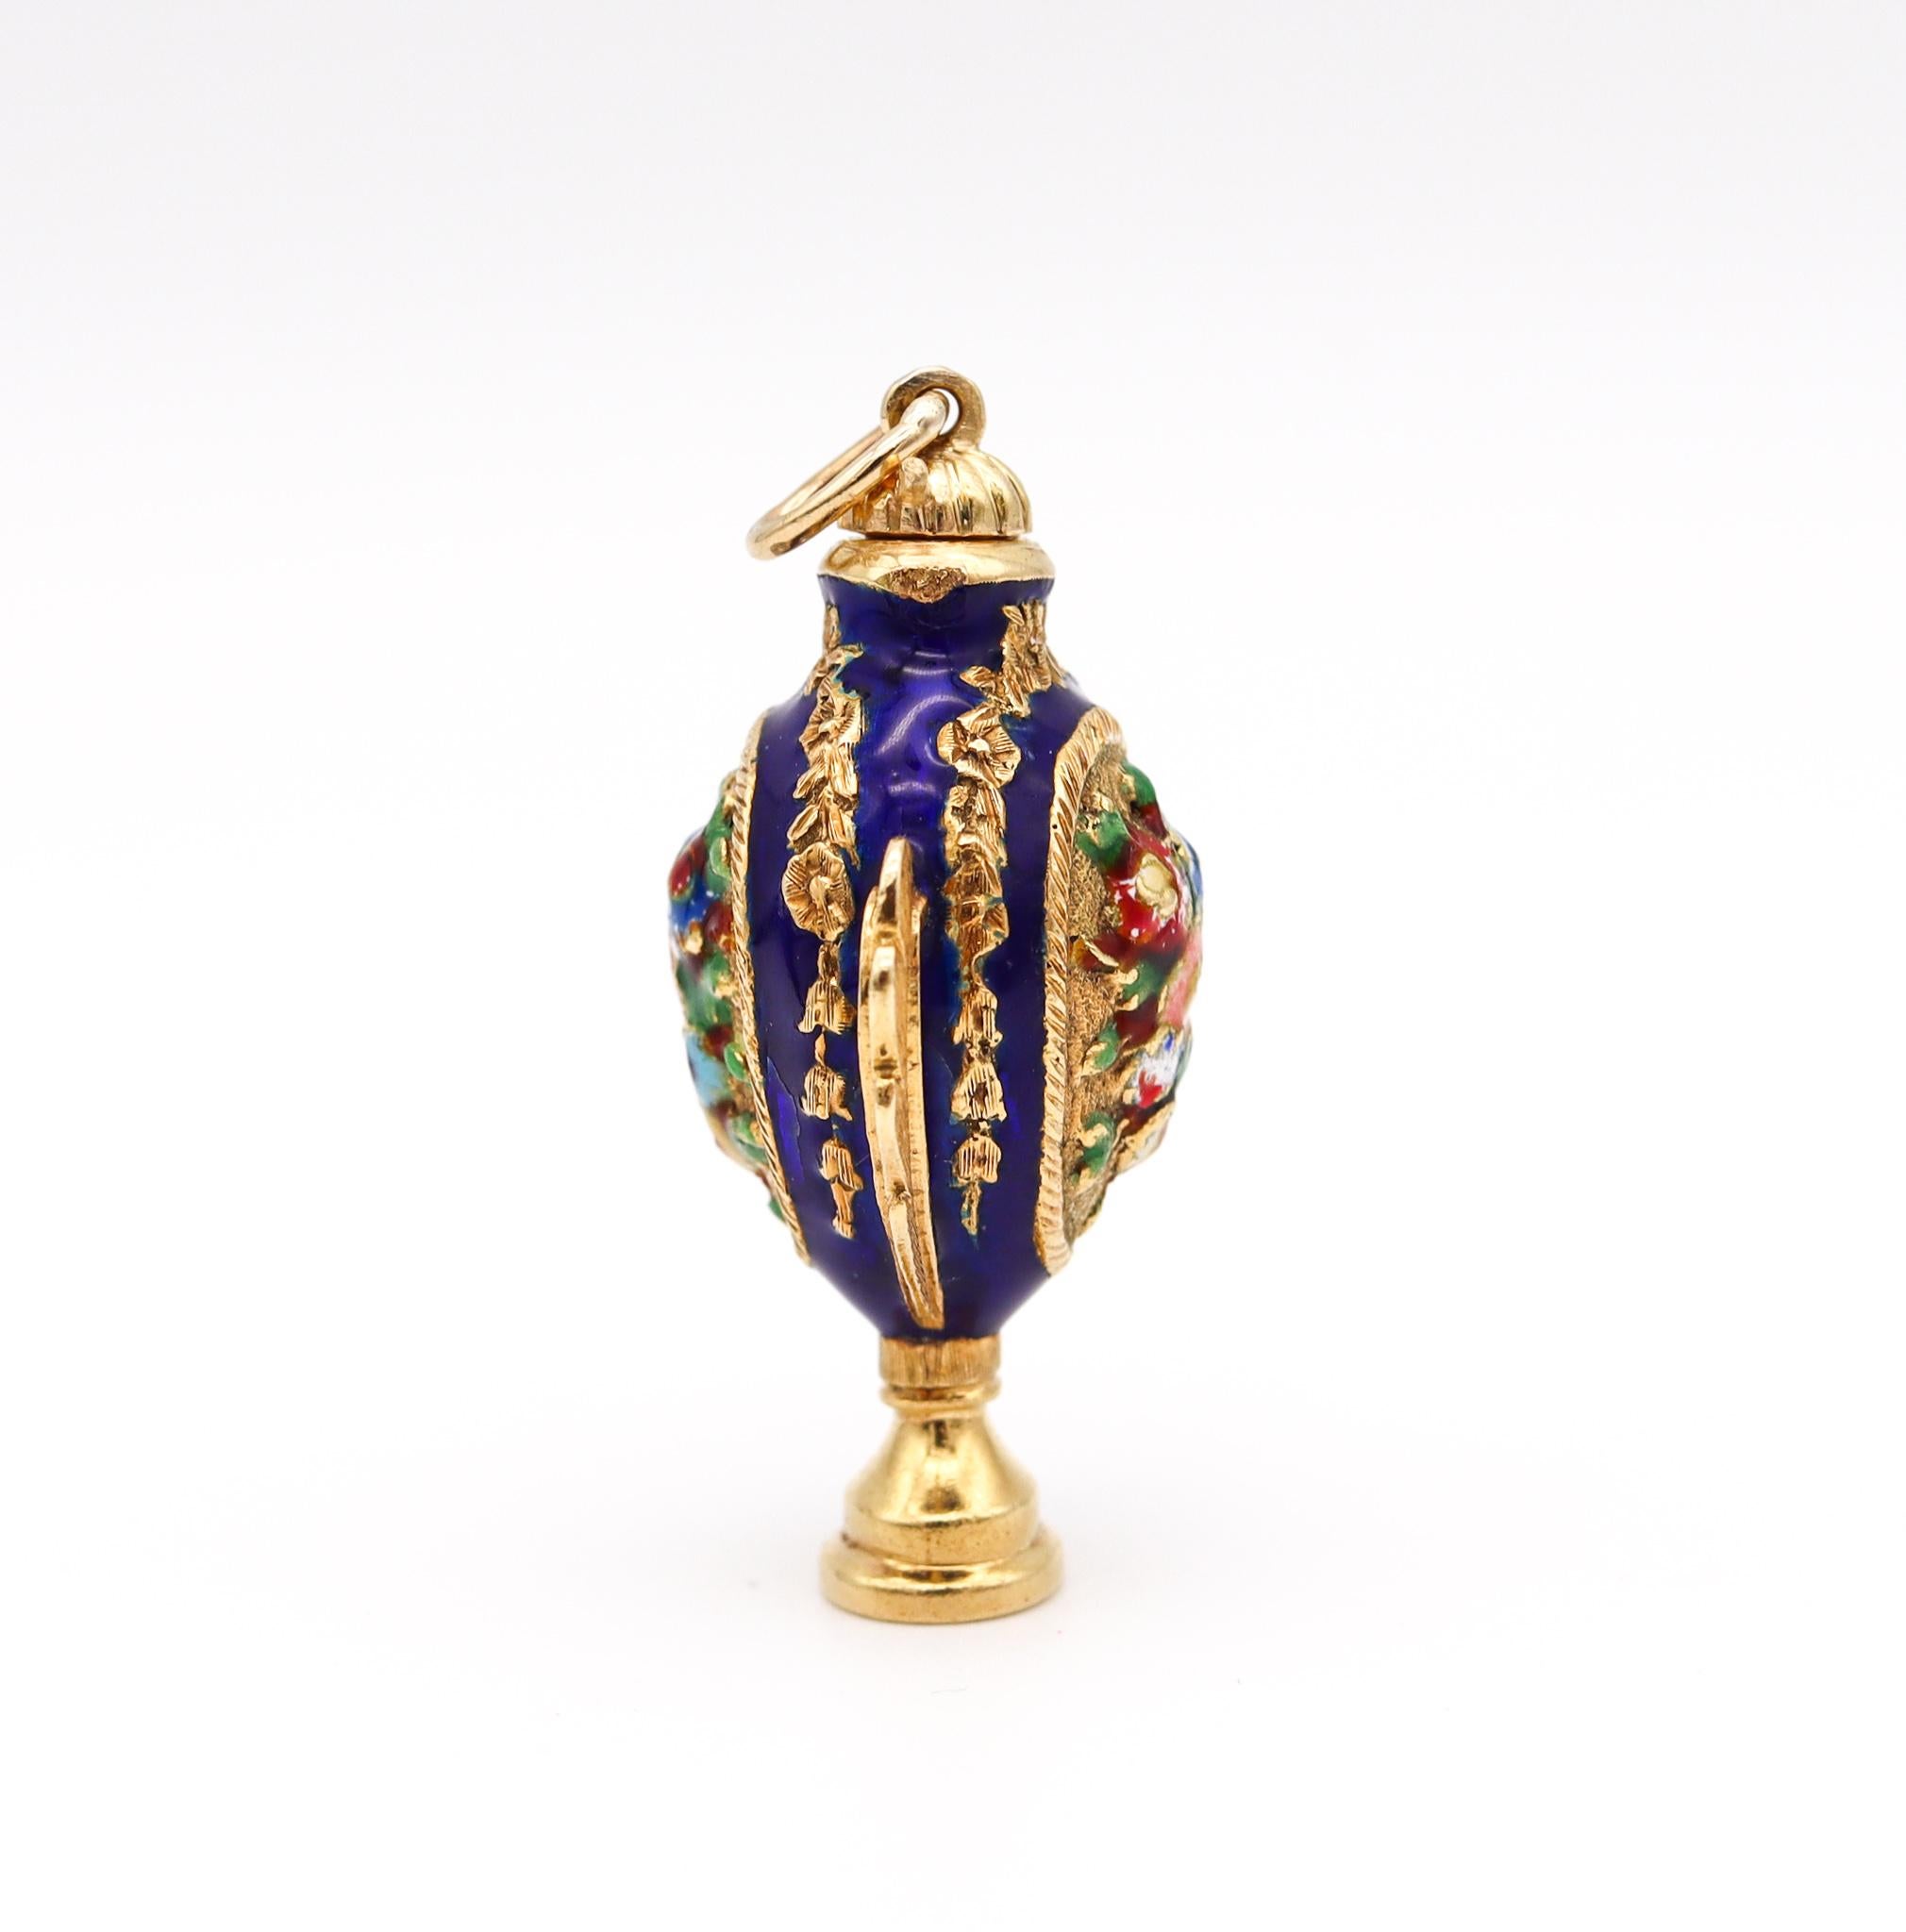 Enameled pendant scent perfume amphora bottle.

Gorgeous vintage piece, created in Venice Italy during the mid century period, back in the 1960. This beautiful three-dimensional pendant perfume bottle has been crafted in the shape of an amphora in 